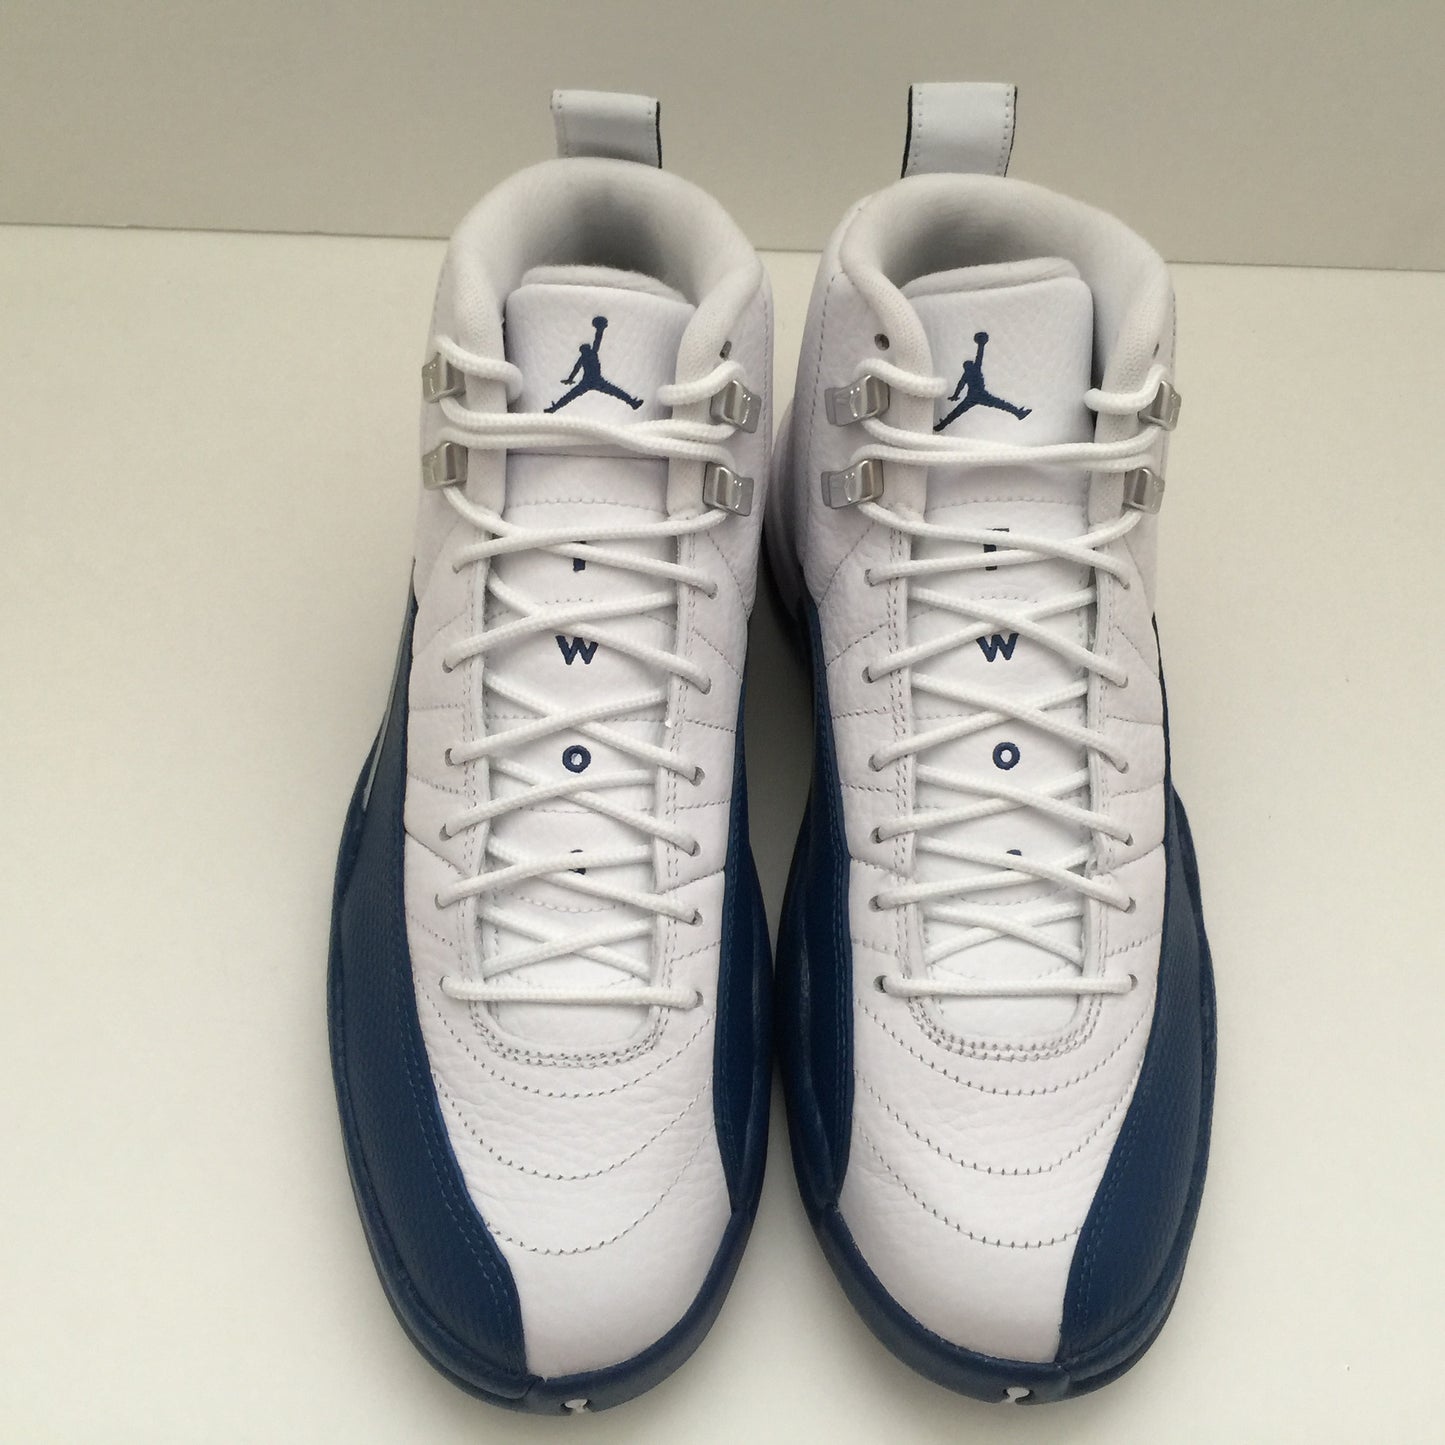 DS Nike Air Jordan 12 XII French Blue Size 8/Size 8.5/Size 10/Size 10.5 - DOPEFOOT
 - 2